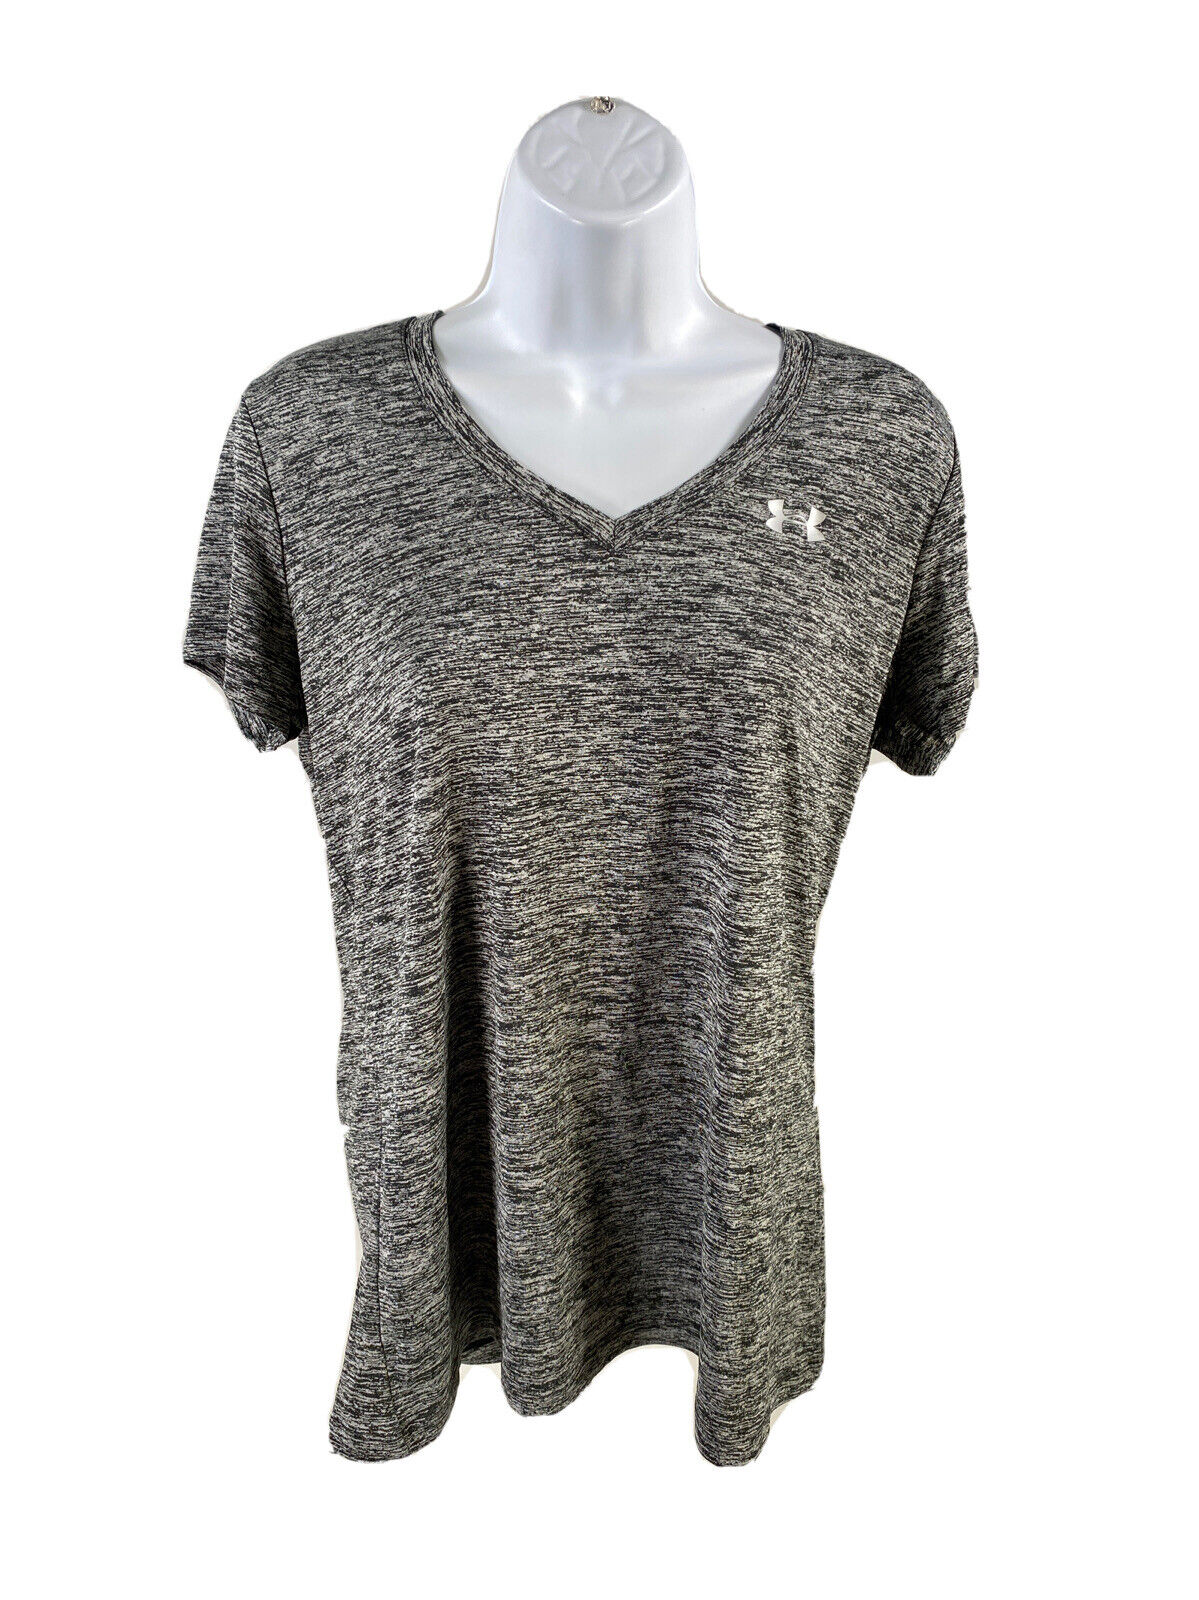 Under Armour Women's Gray Heathered V-Neck Athletic Shirt - M